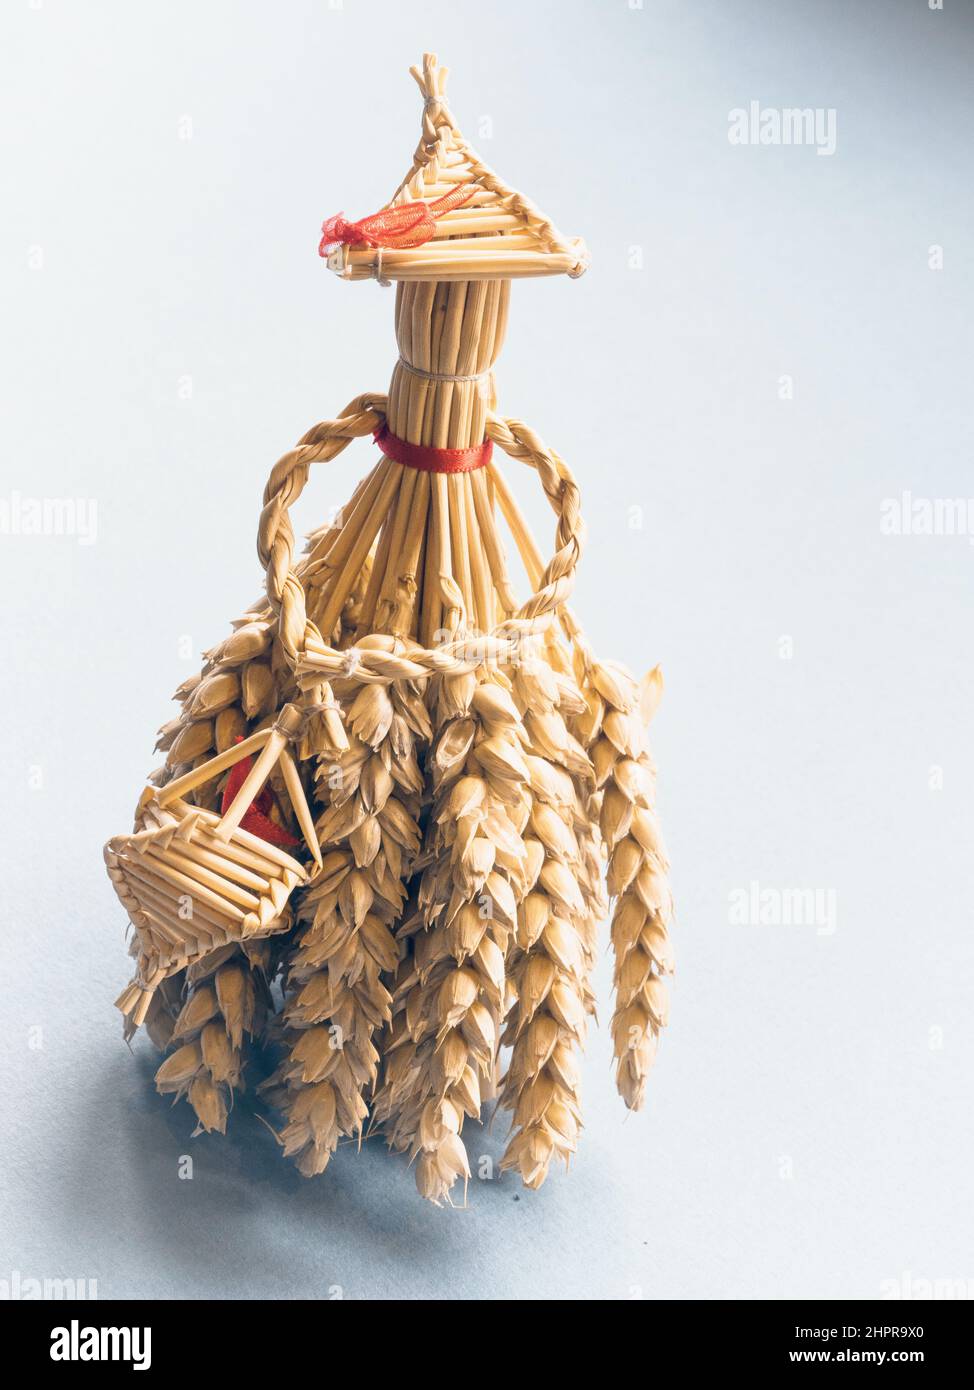 Handmade English 'Harvest Maid' corn dolly also known as 'Corn Mothers', 'Corn Dolls' or 'Corn Maidens' made from wheat to celebrate the harvest being Stock Photo